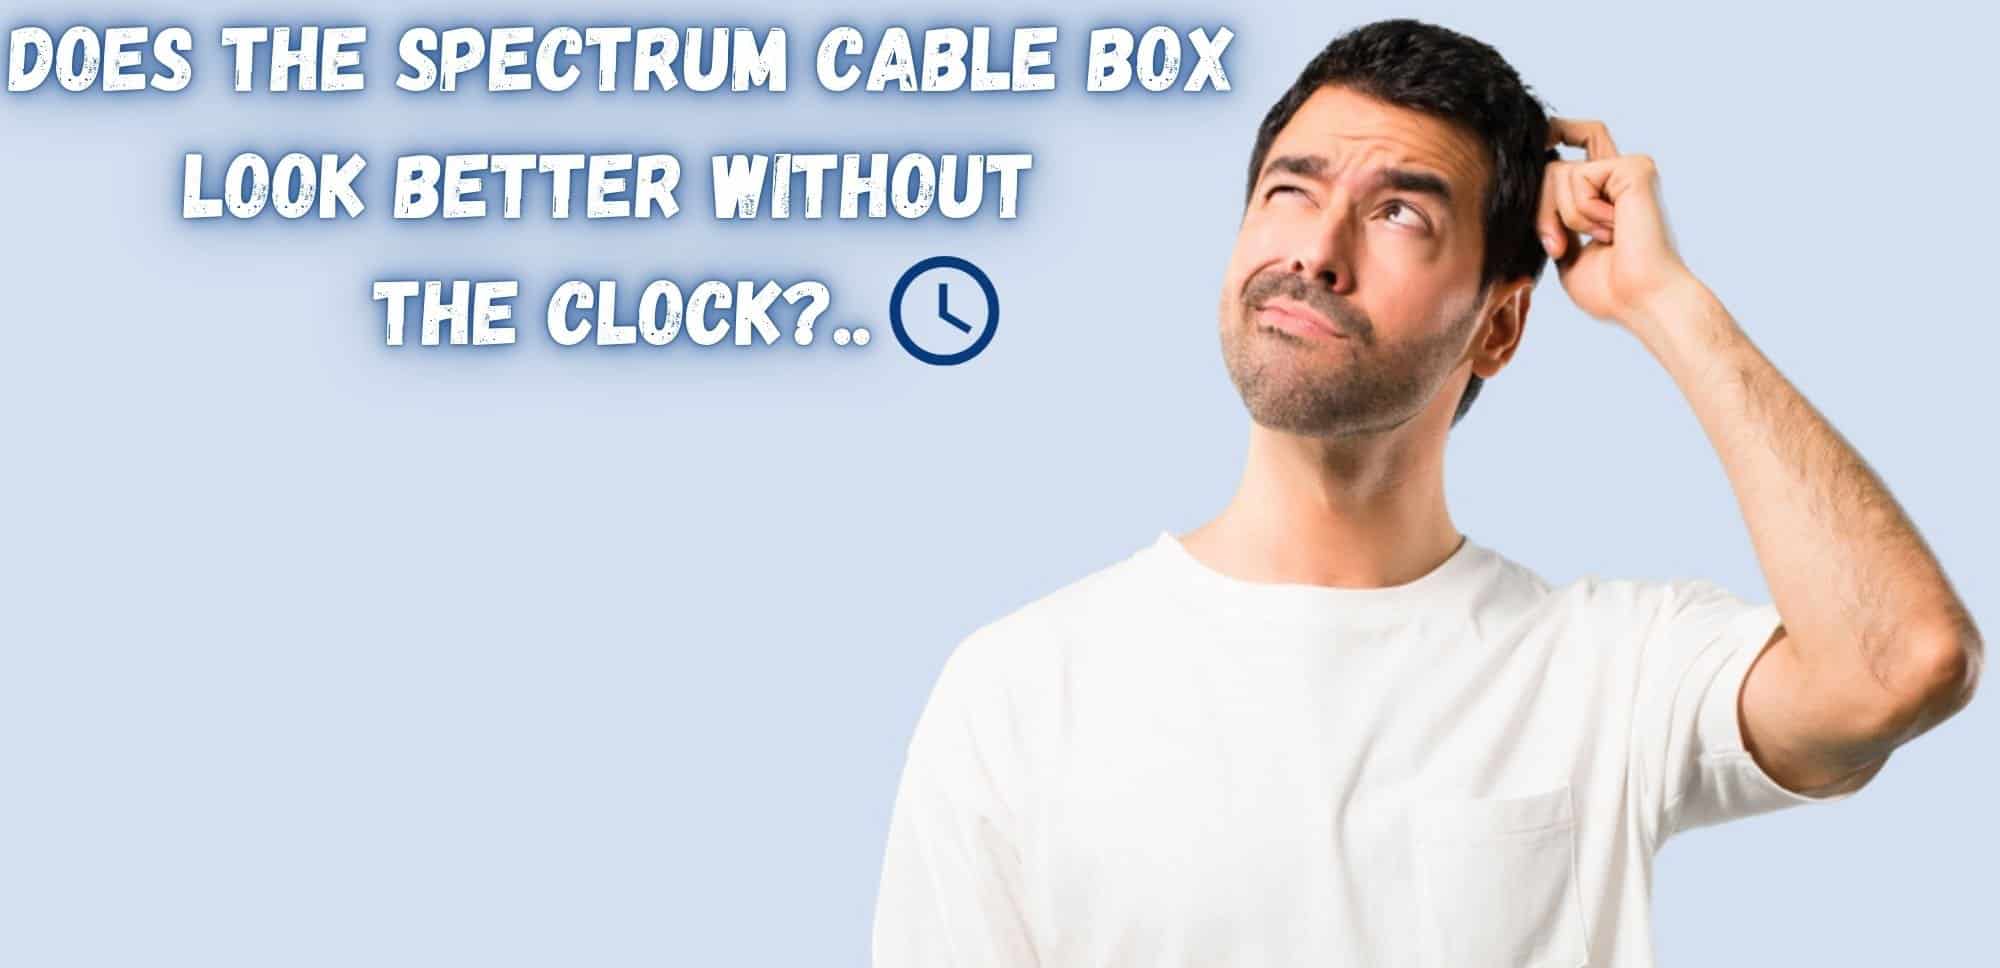 Does the Spectrum Cable Box Look Better Without the Clock